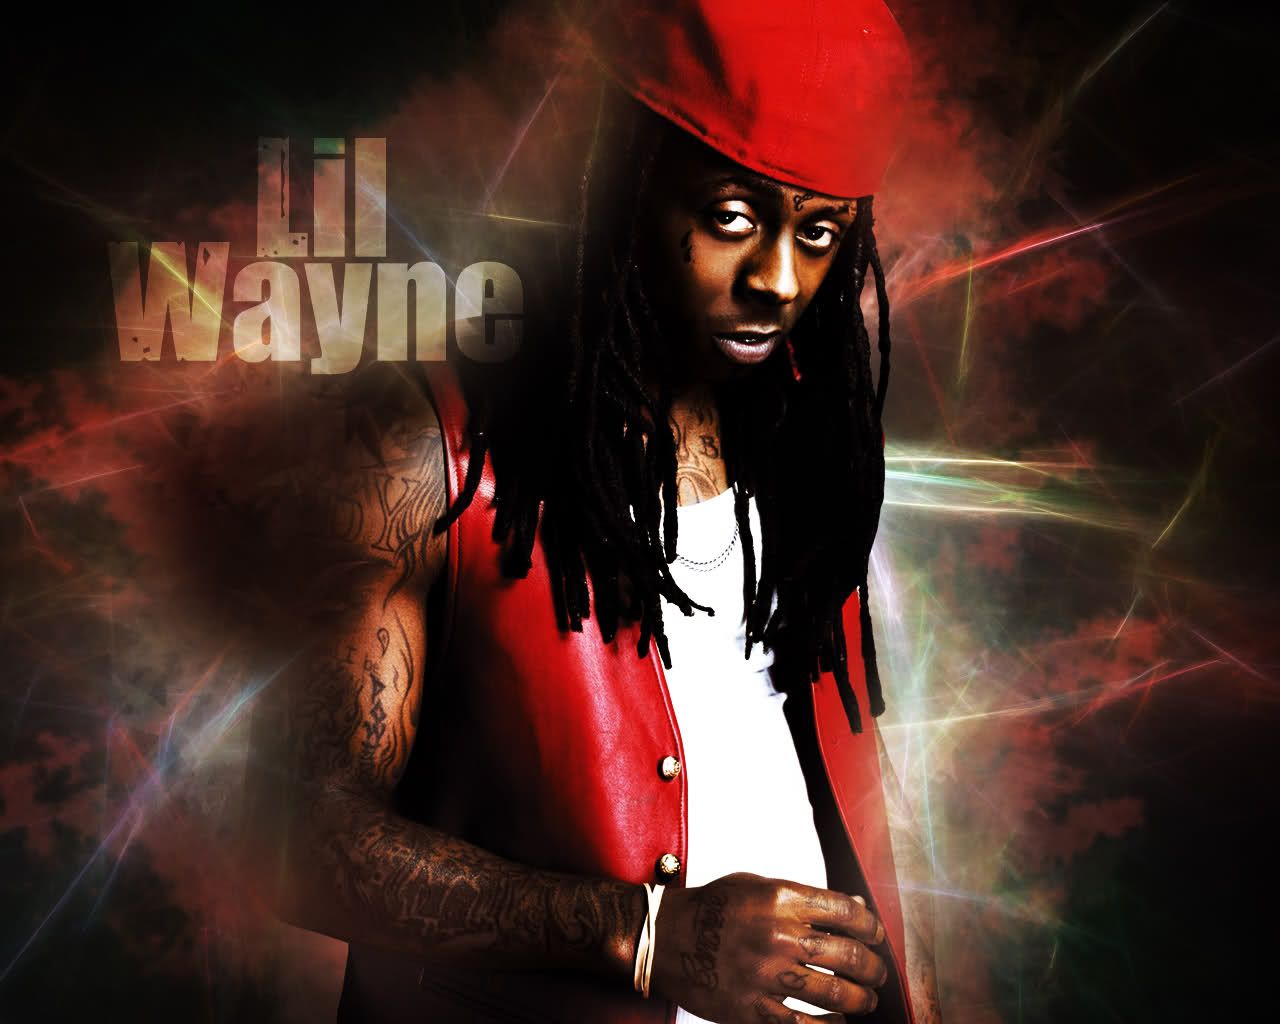 Lil wayne wallpapers hd 11 wallpapers HD Wallpaper backgrounds